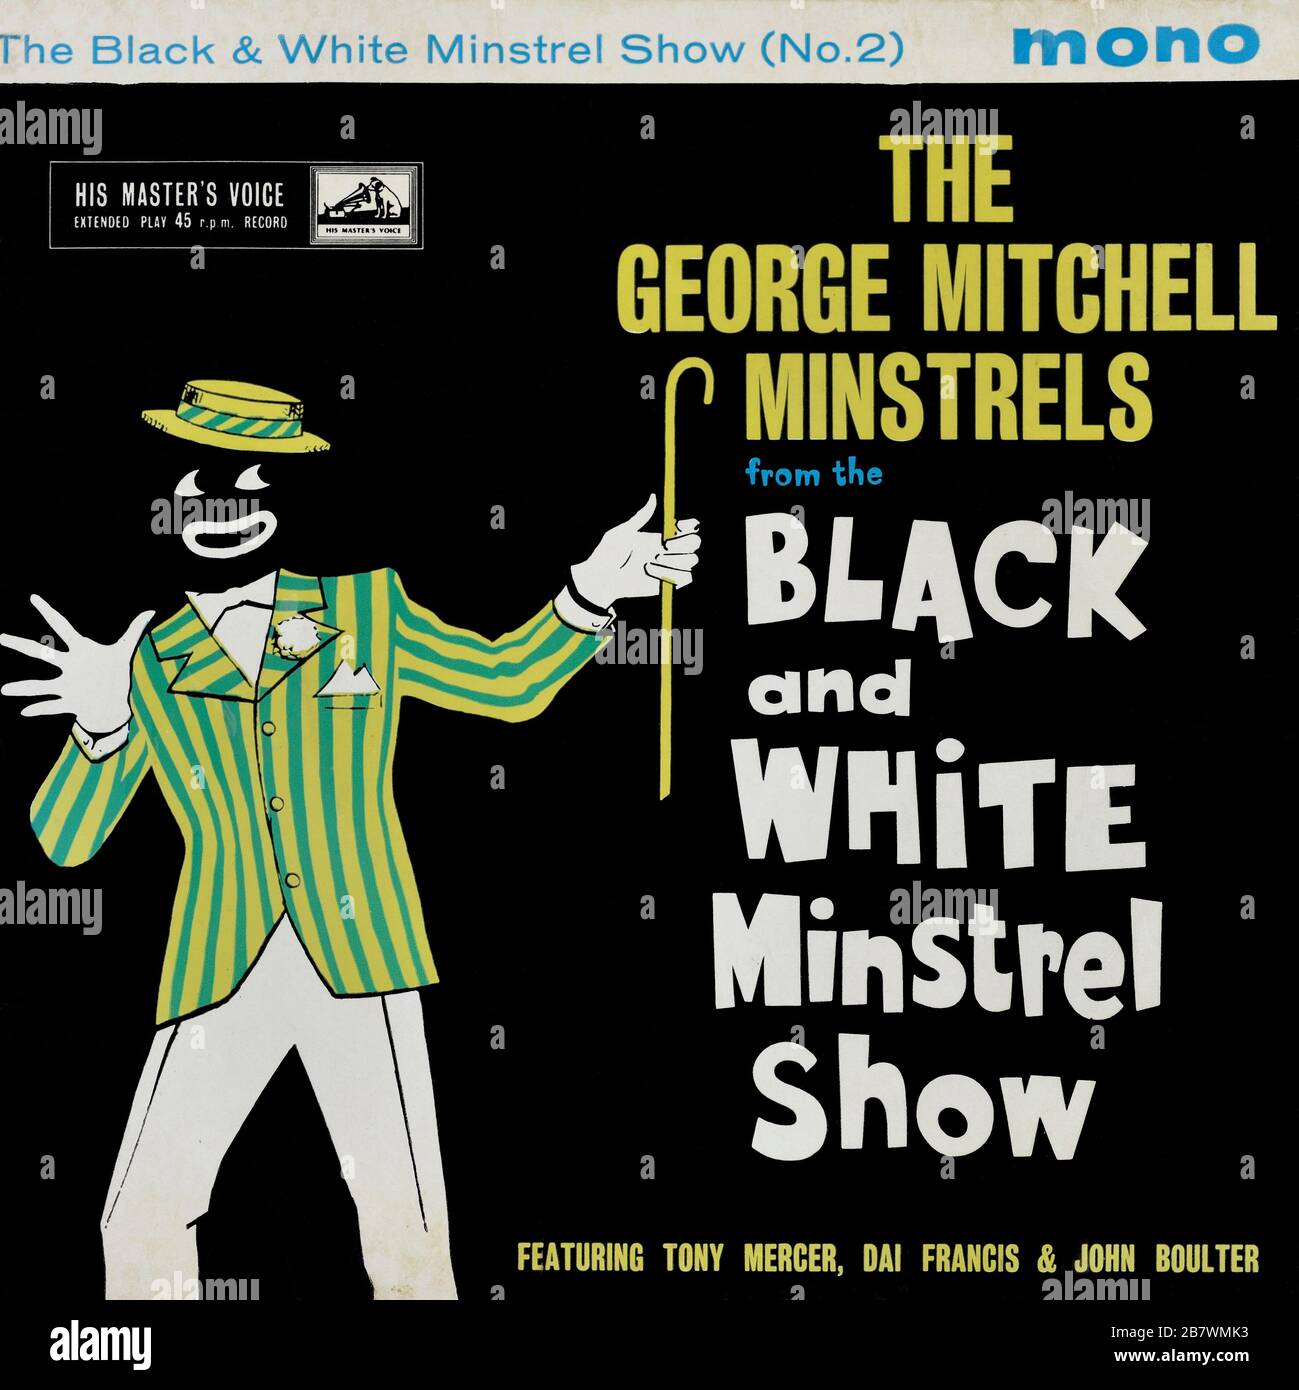 The George Mitchell Minstrels from the Black and White Minstrel Show No.2 EP 7' 45 his Master's Voice, Vinyl Record Sleeve. GROSSBRITANNIEN. Circa 1963 Stockfoto